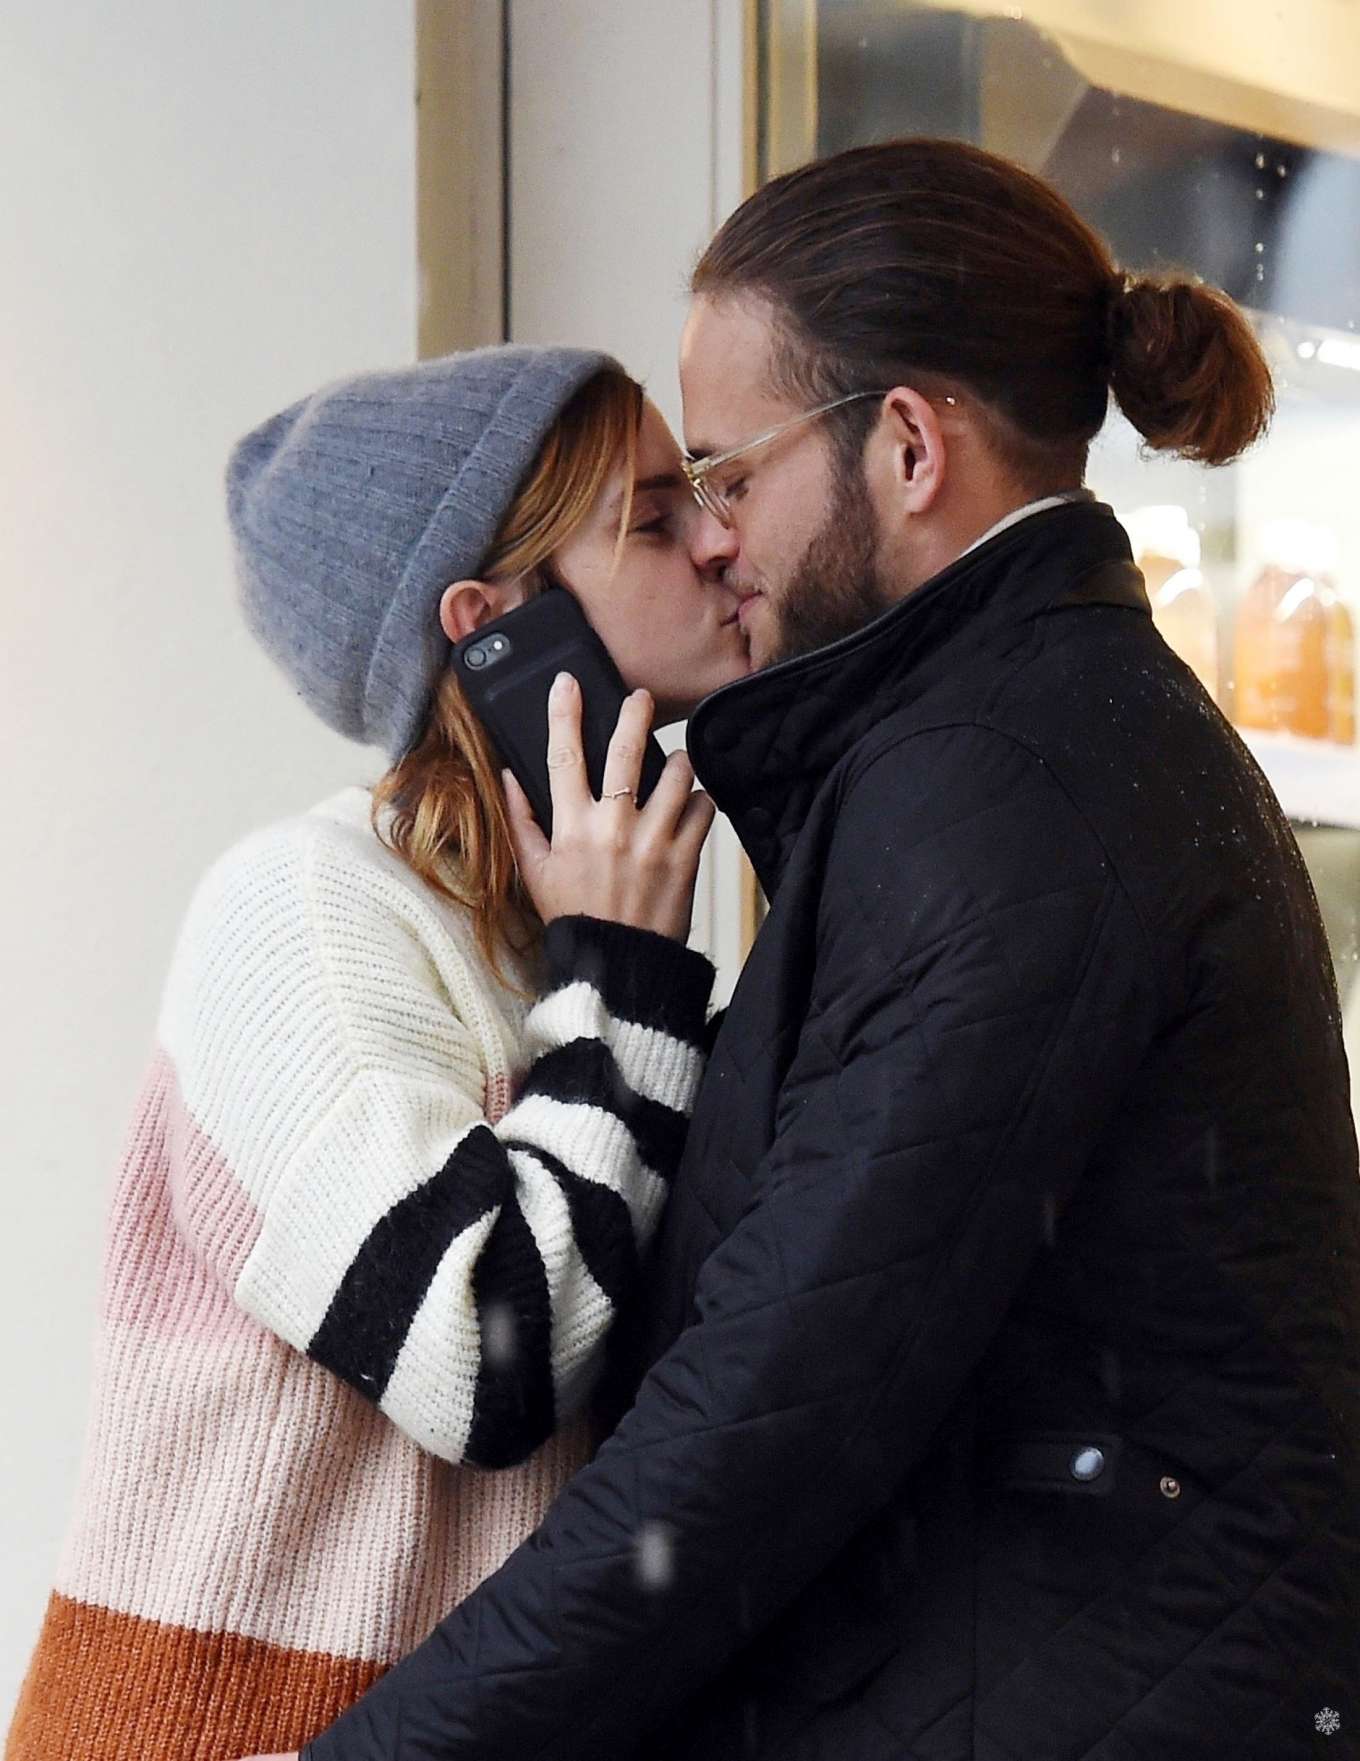 Emma Watson - Shares a kiss with mystery man in London